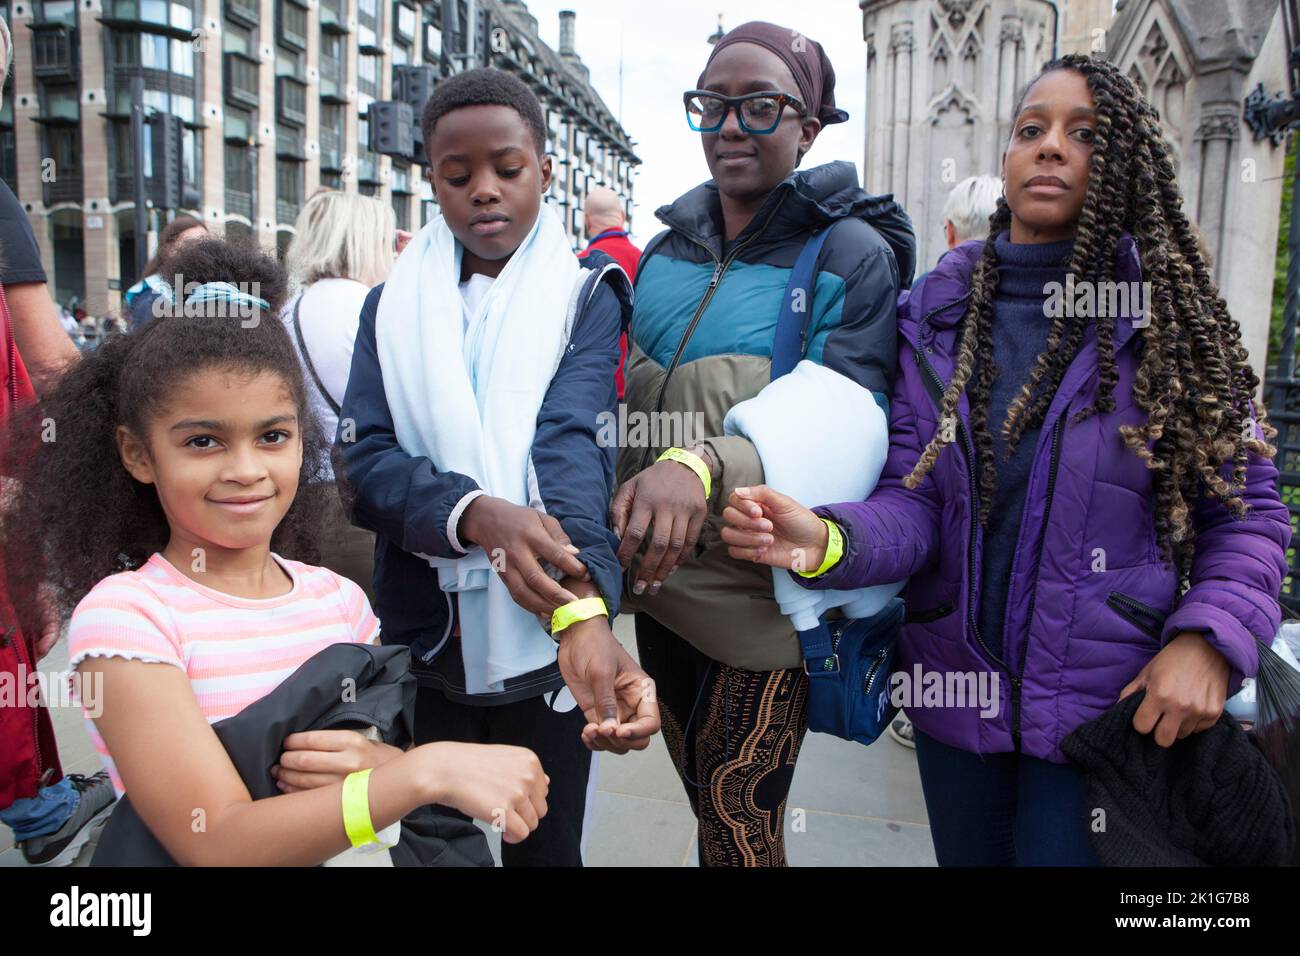 London, UK, 18 September 2022: A family show their wristbands from the queue after they have filed past Queen Elizbeth II's coffin in Westminster Hall. The queue for admission to Westminster Hall has now closed in order for all of those already in the queue to pass through before 6.30am tomorrow morning. Anna Watson/Alamy Live News Stock Photo